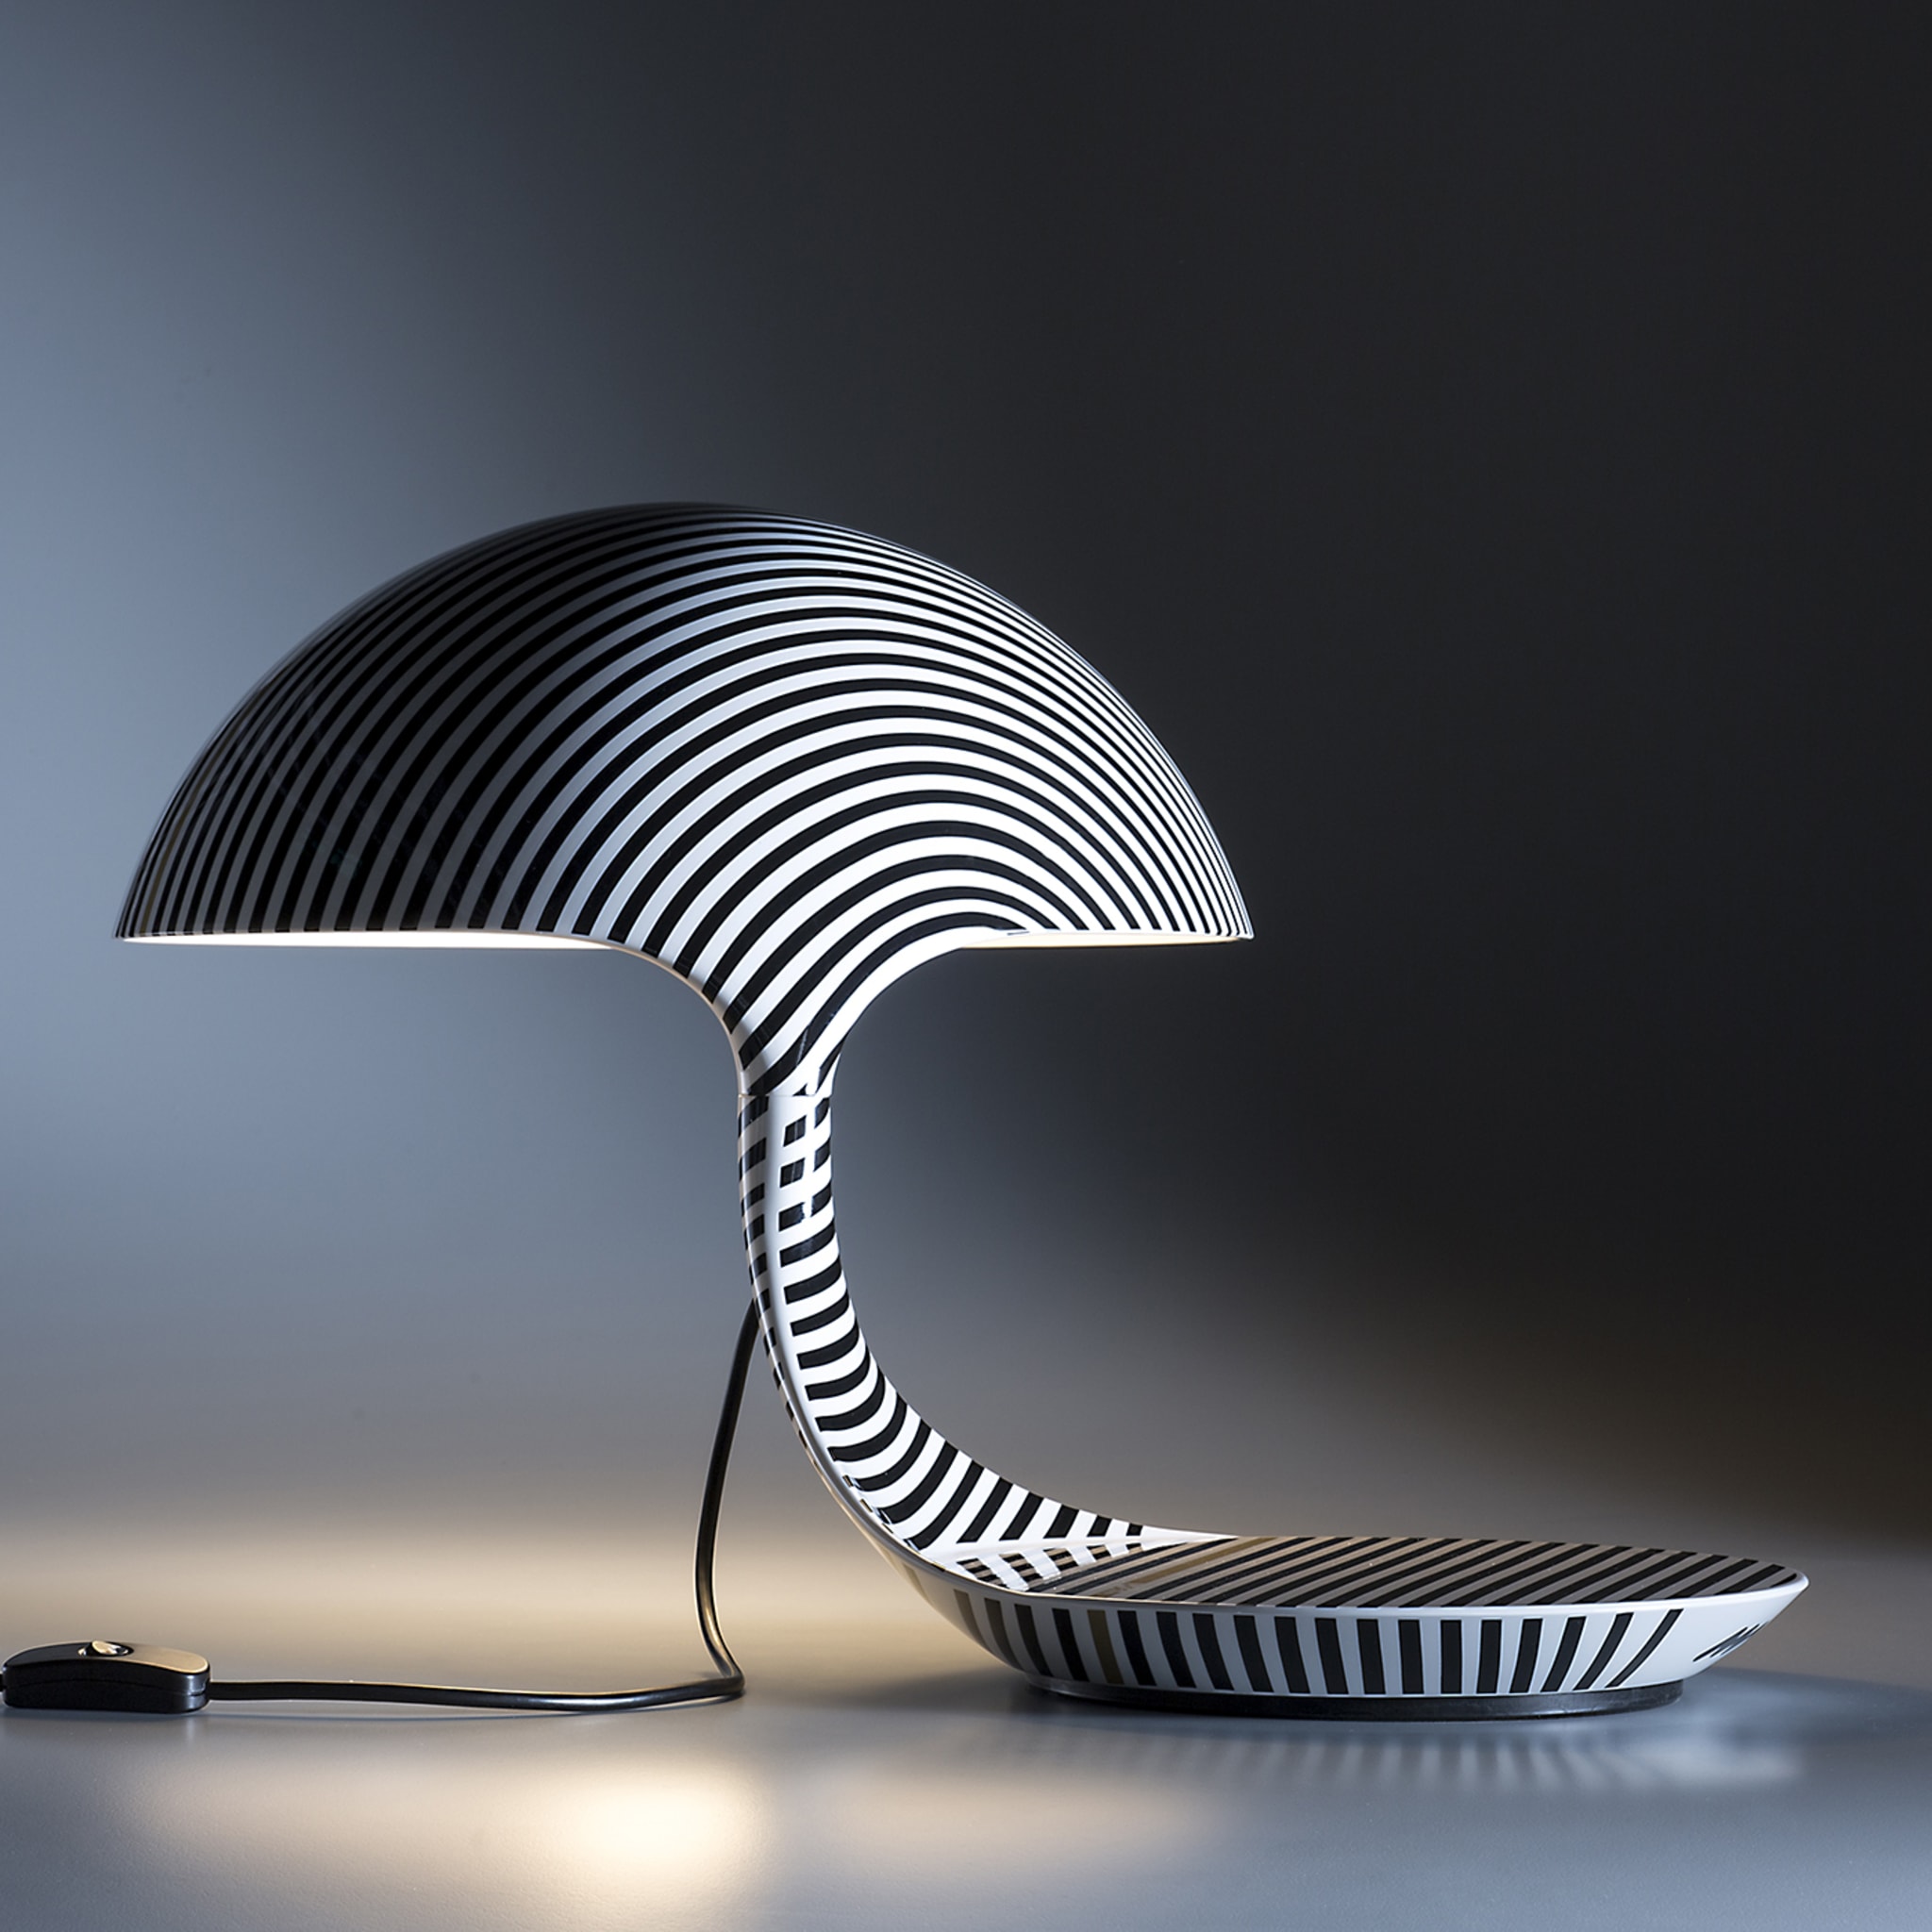 Cobra Texture Striped Table Lamp by Area 17 - Alternative view 1